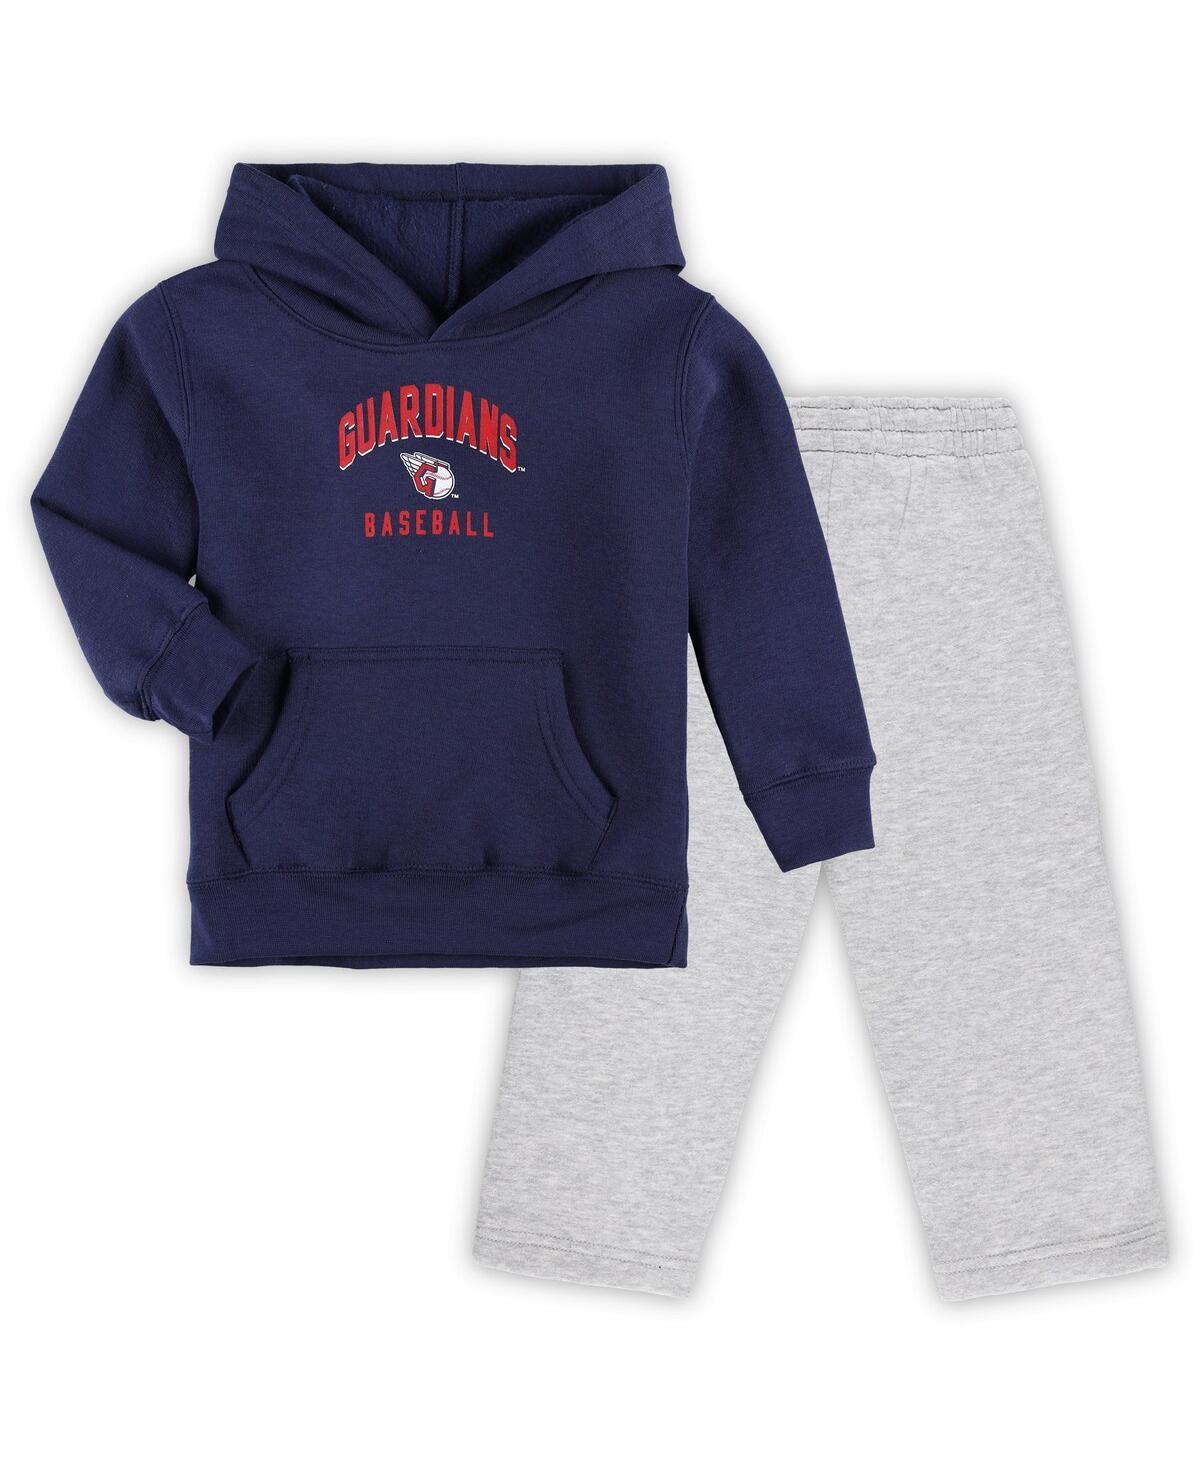 Outerstuff Babies' Toddler Boys And Girls Navy, Gray Cleveland Guardians Play-by-play Pullover Fleece Hoodie And Pants In Navy,gray